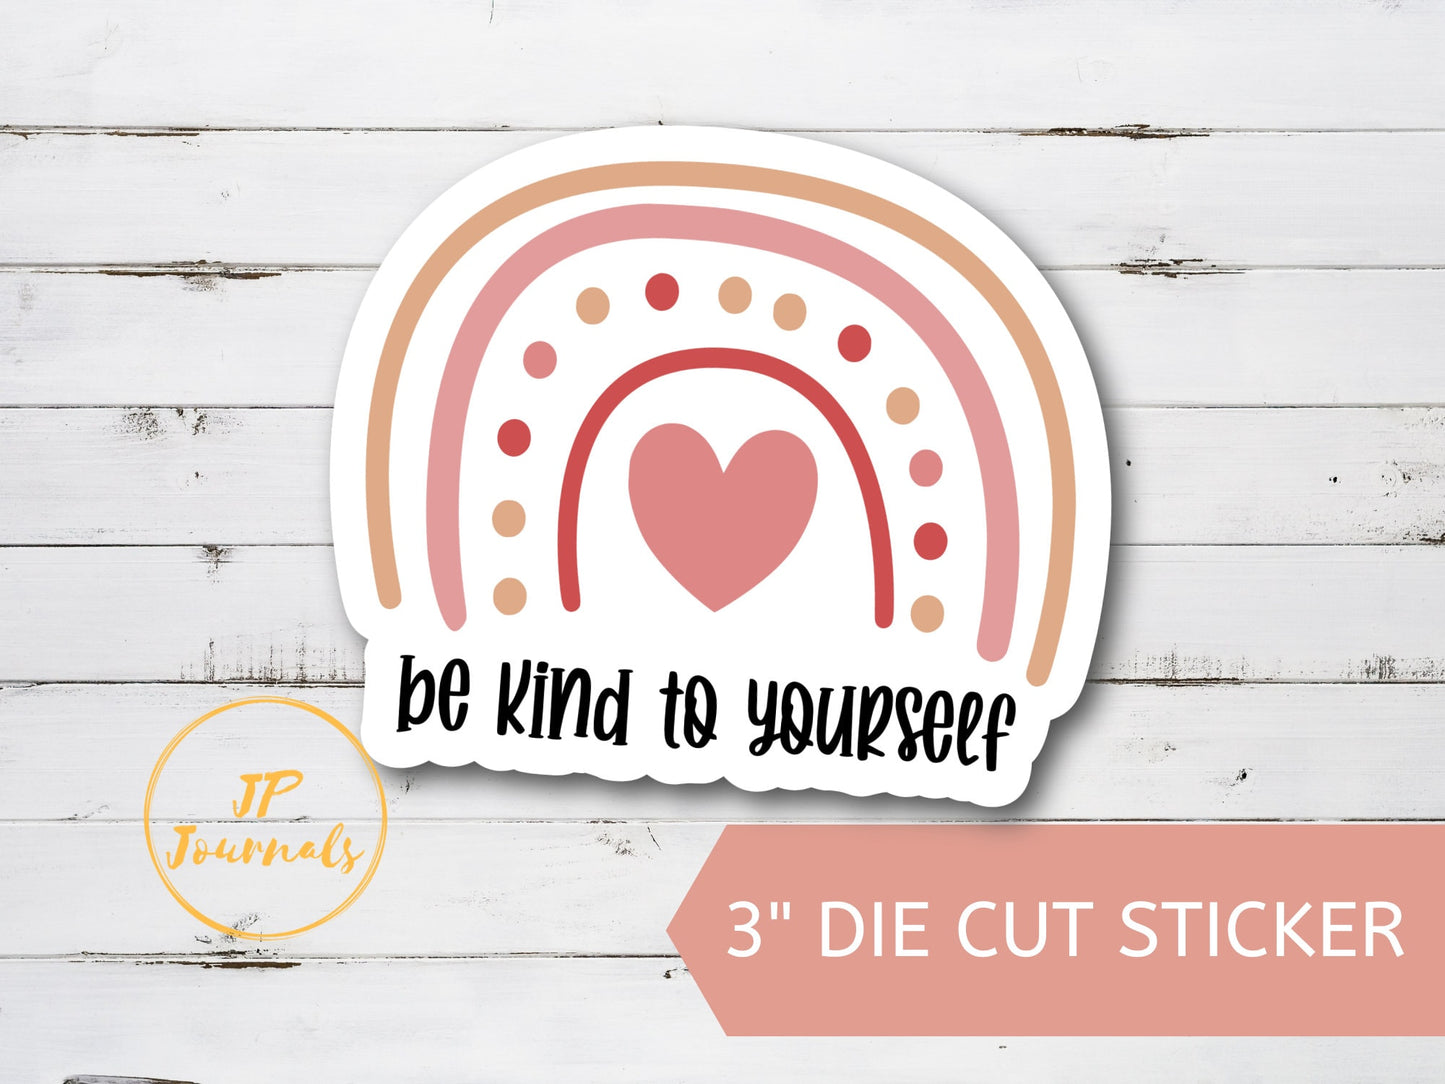 Be Kind to Yourself Inspirational Sticker Gift, Cute Die Cut Encouraging Sticker